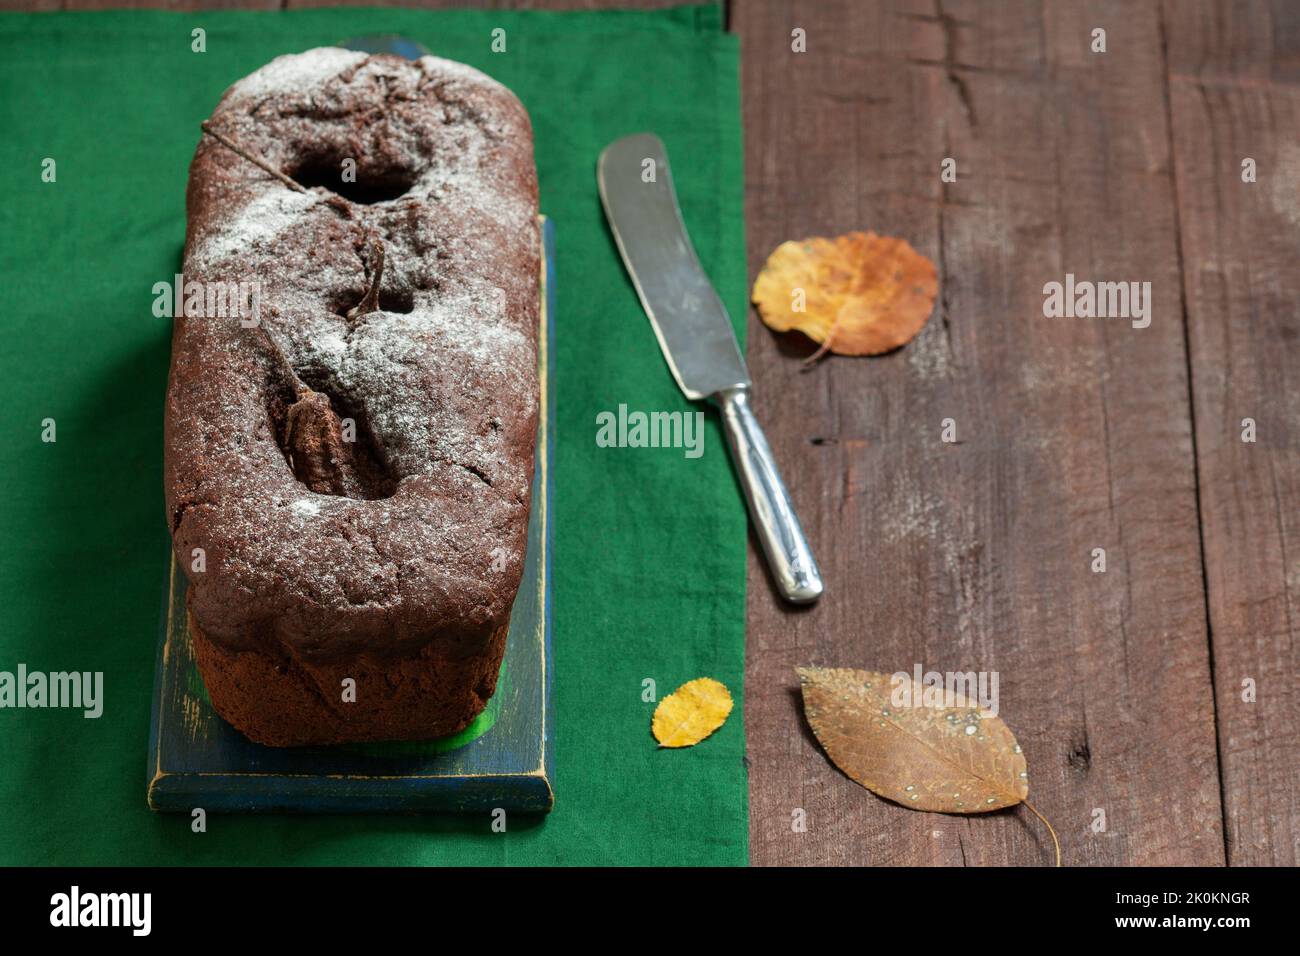 Chocolate pear cake on a green background. Rustic style. Stock Photo